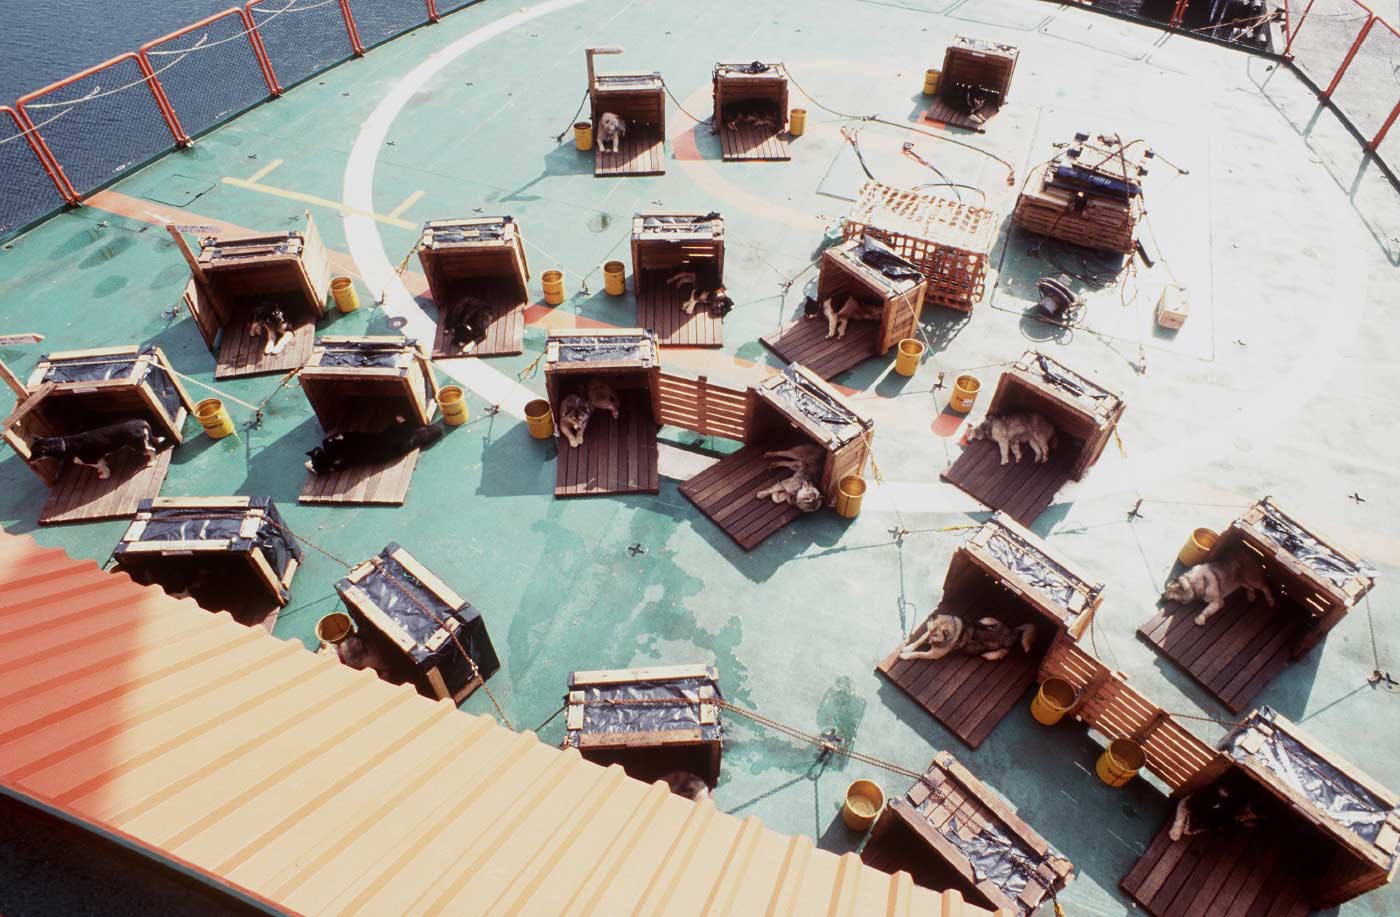 Colour photo of the deck of a ship on which are multiple kennels housing huskies.